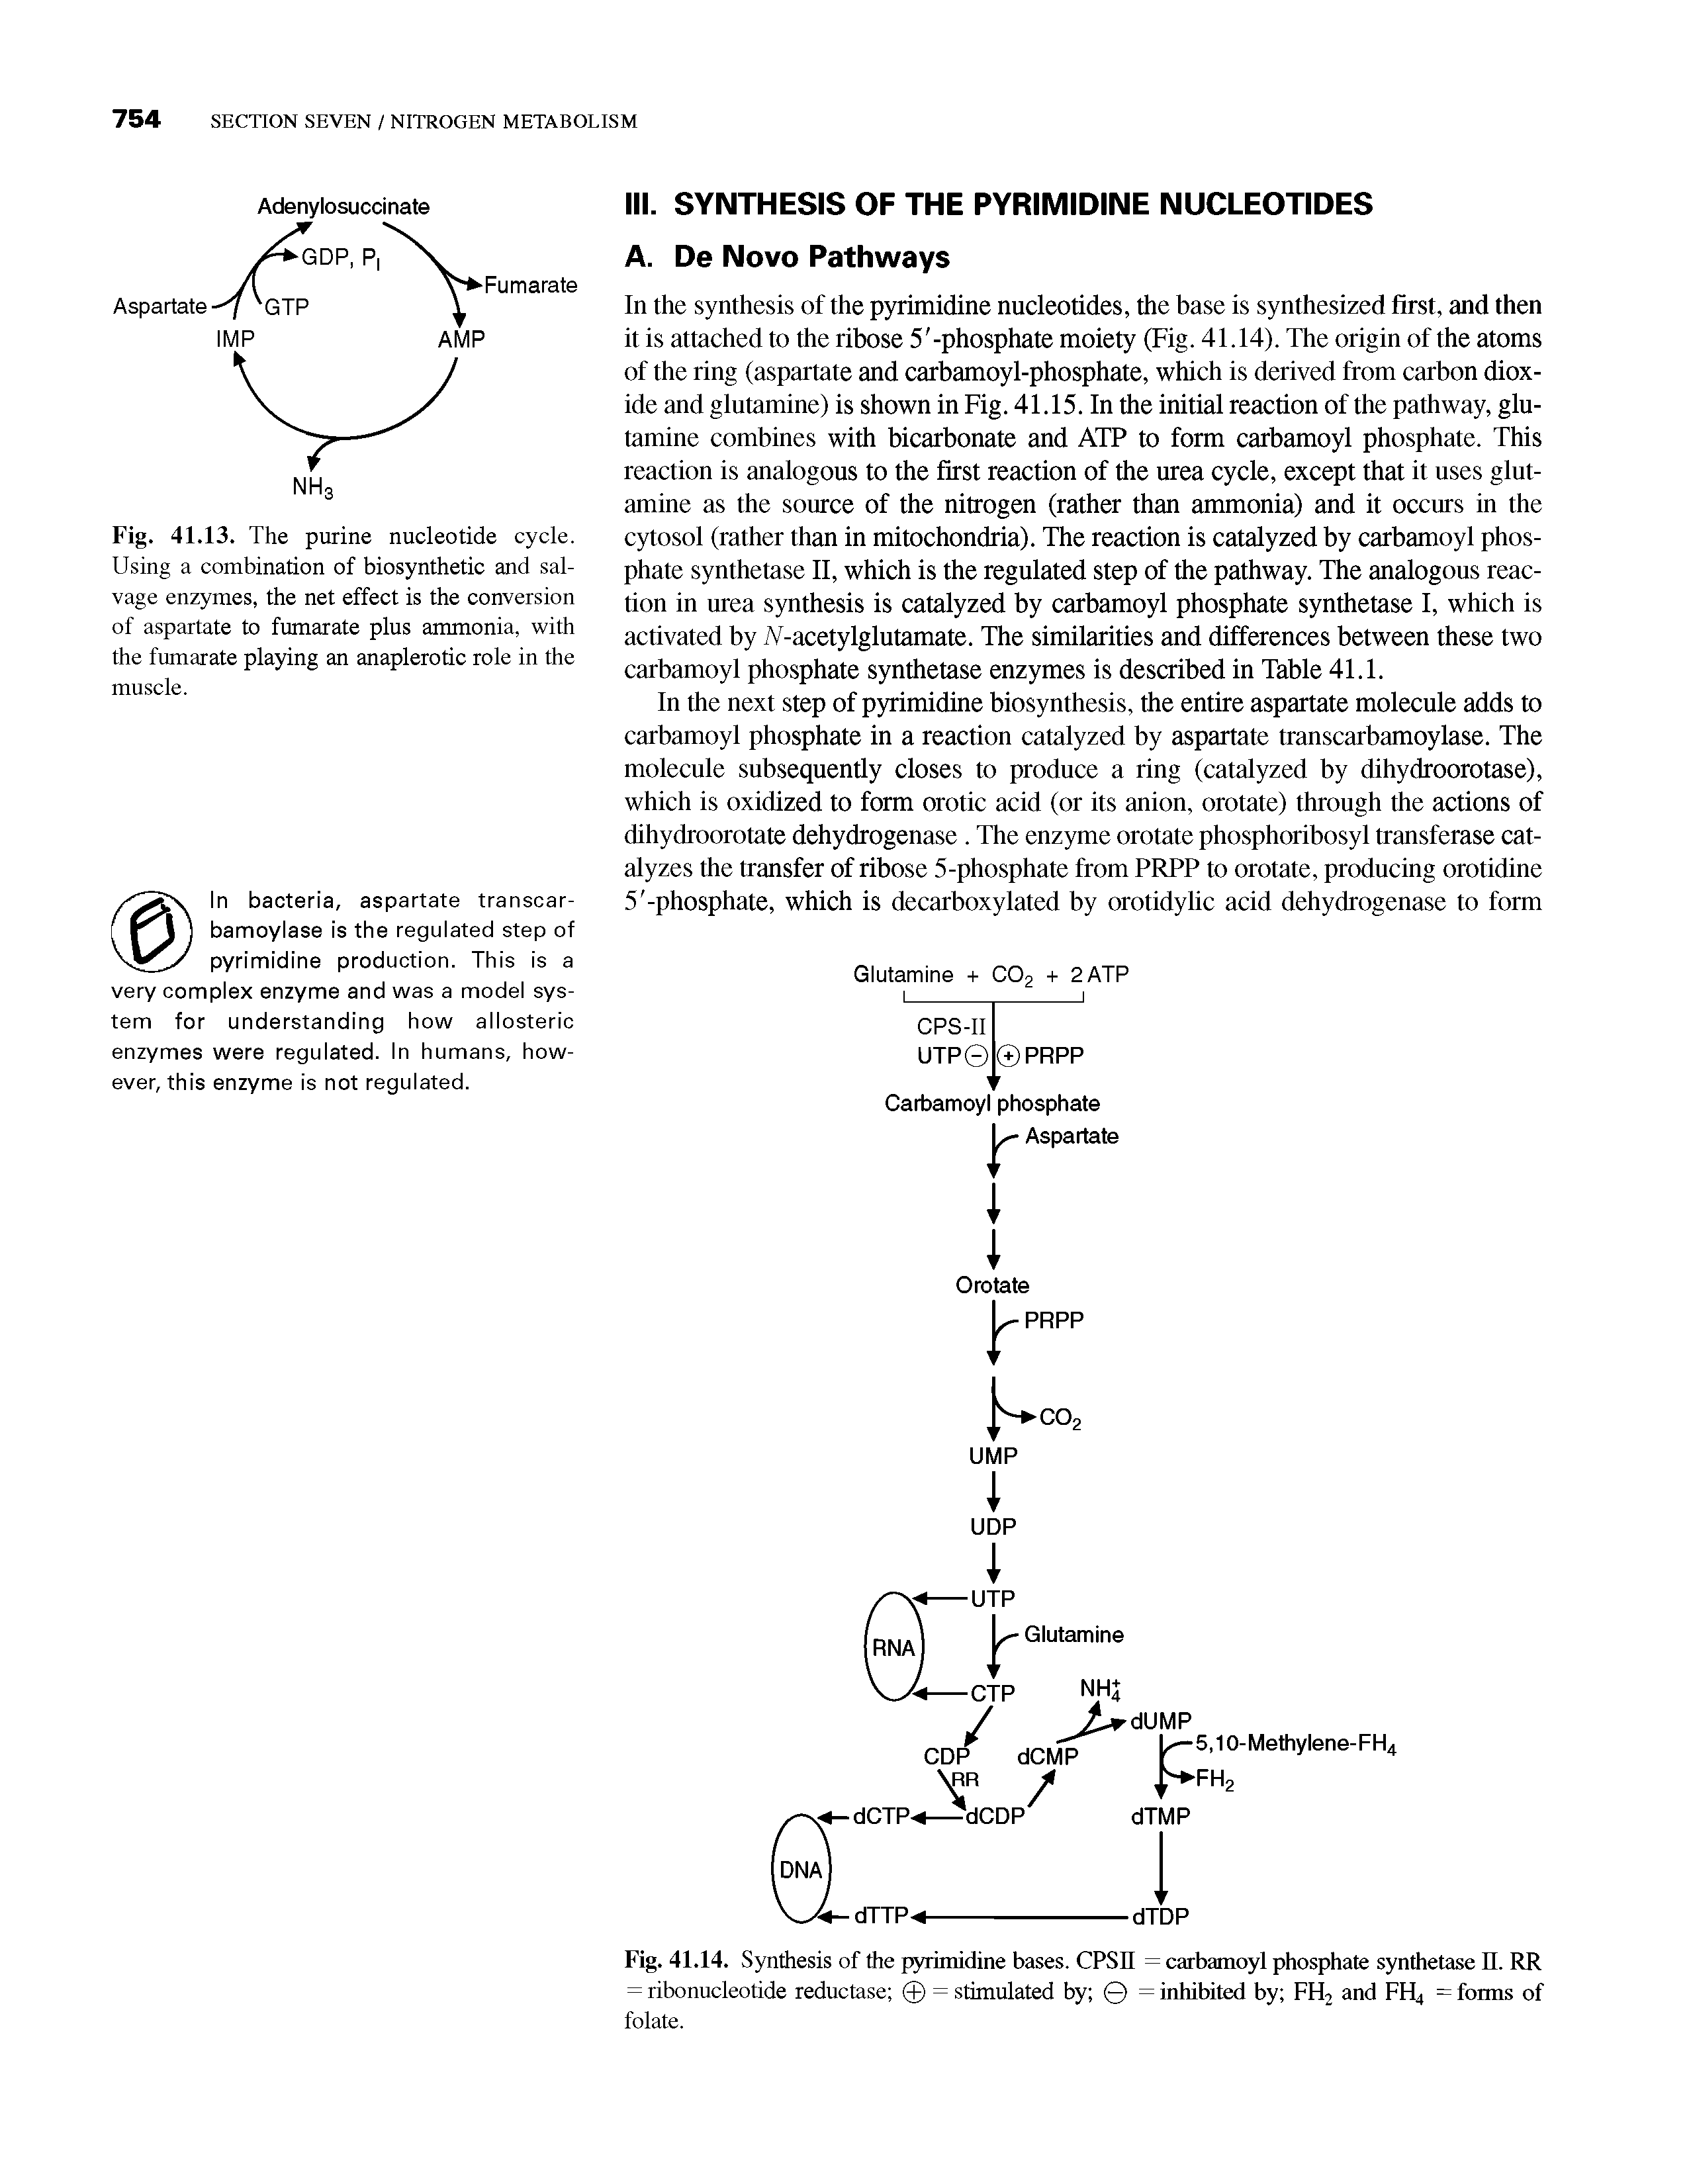 Fig. 41.13. The purine nucleotide cycle. Using a combination of biosynthetic and salvage enzymes, the net effect is the conversion of aspartate to fumarate plus ammonia, with the fumarate playing an anaplerotic role in the muscle.